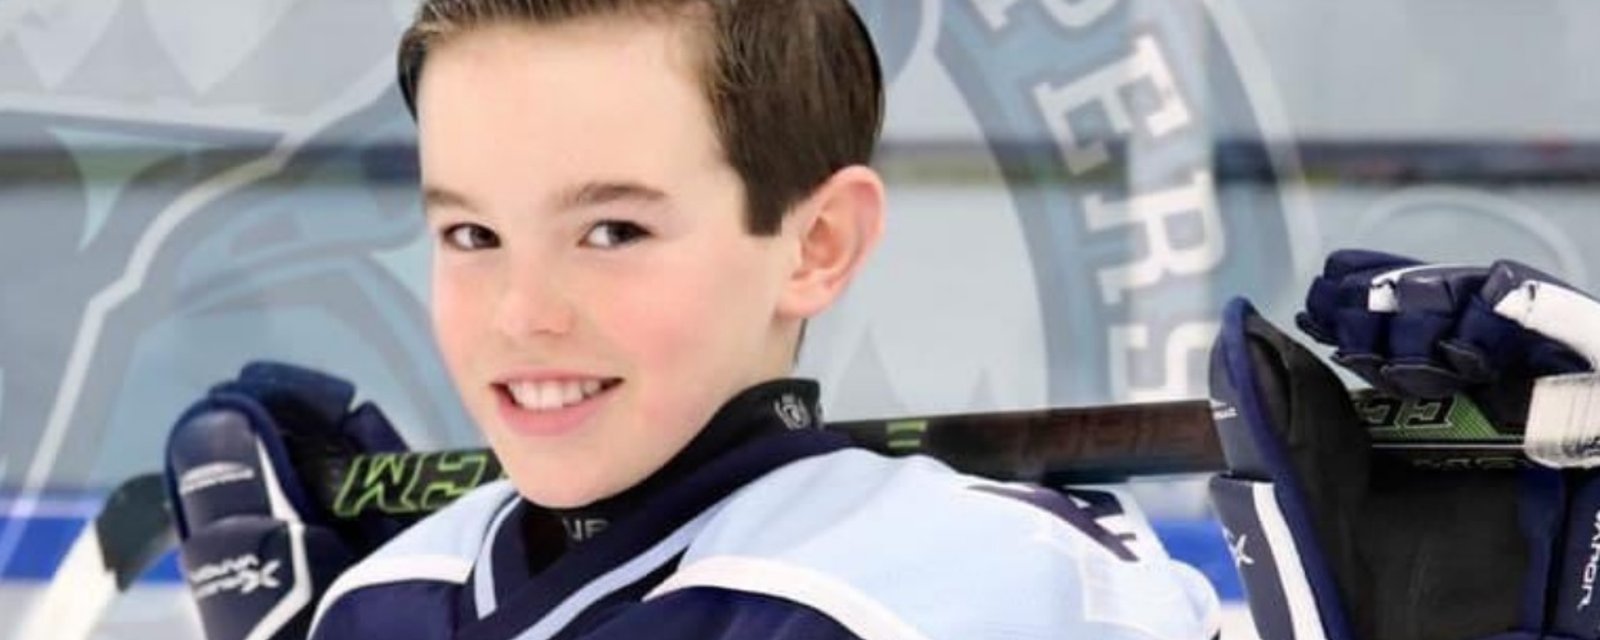 Hockey player paralyzed in tragedy similar to the one that took Colby Cave.